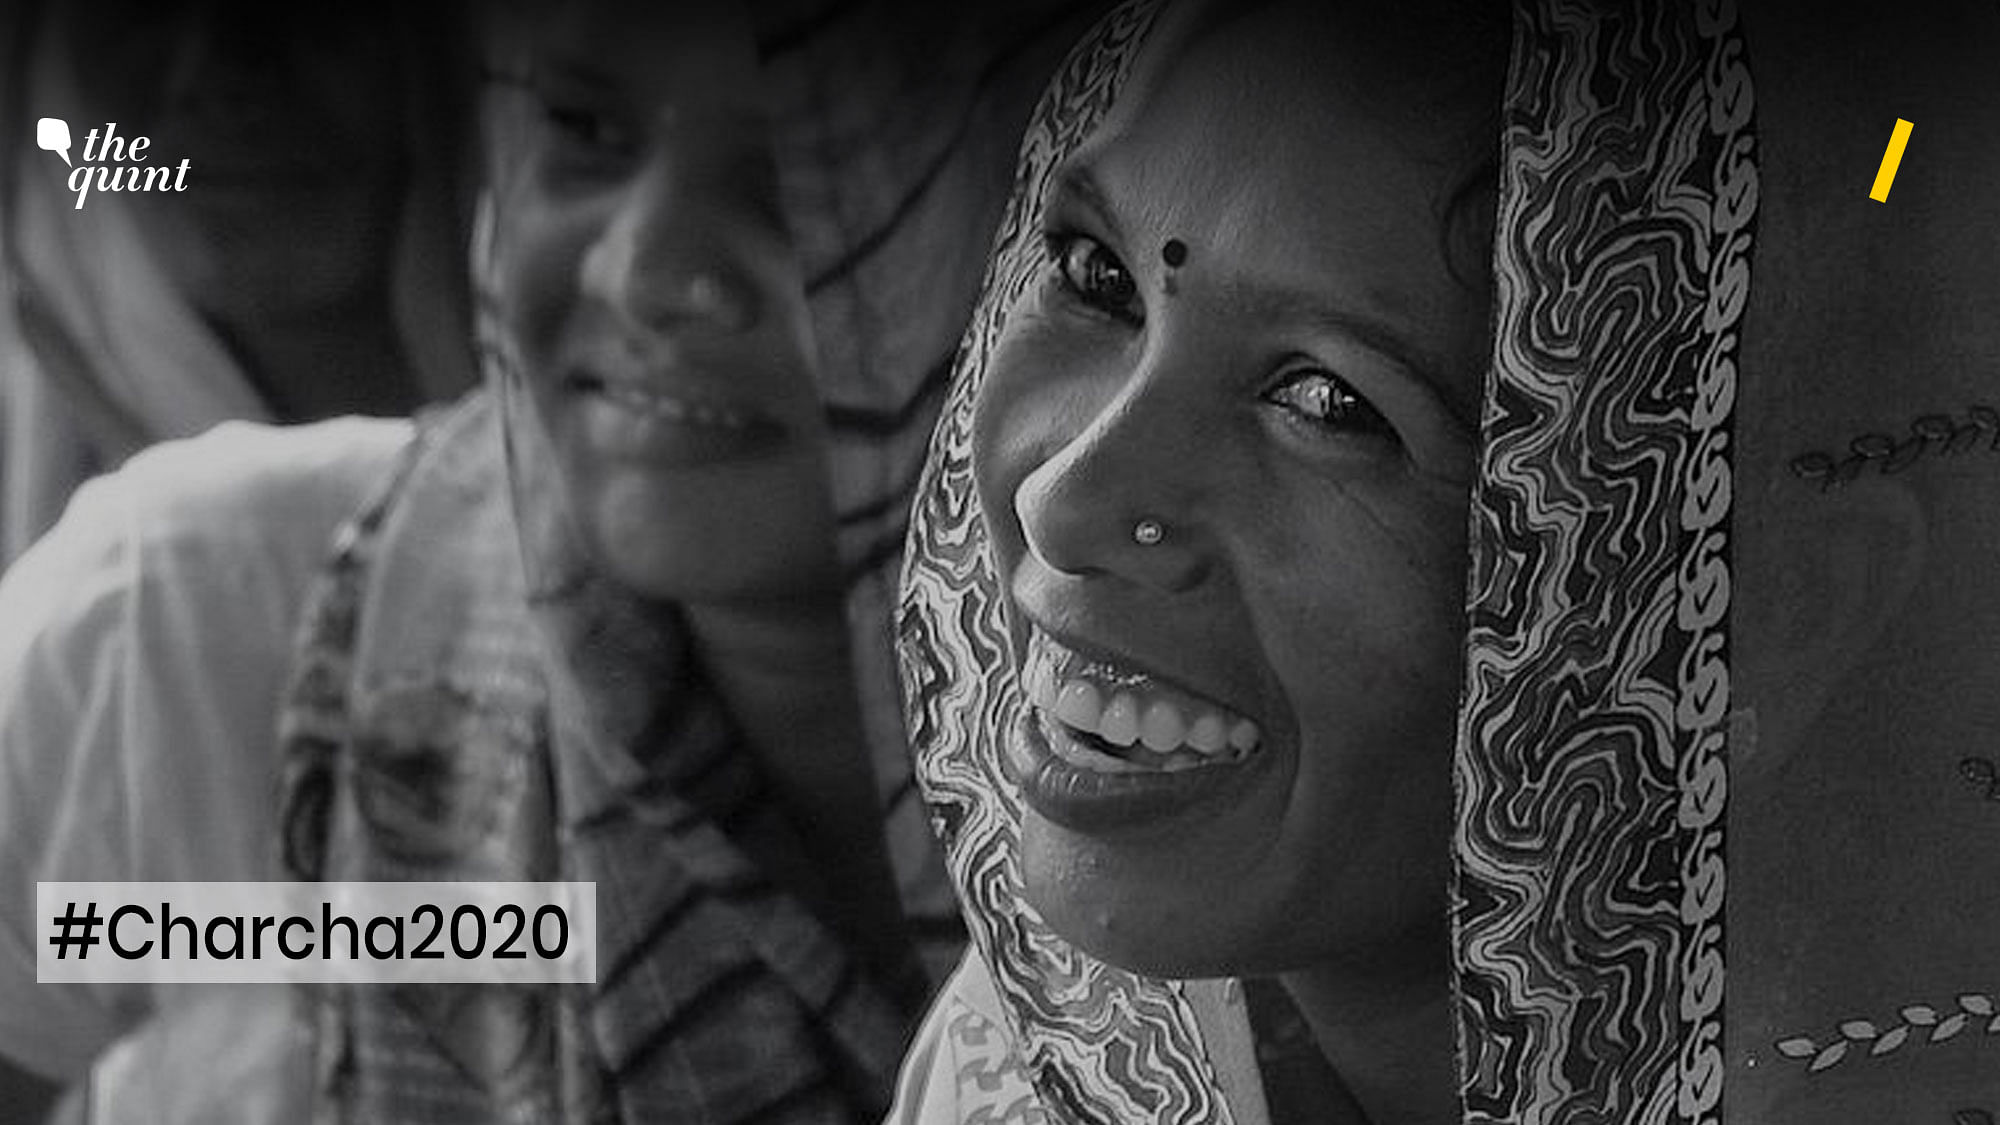 Register for the #Charcha2020 event to address the toughest challenges in bringing gender equality in  post-COVID-19 world.